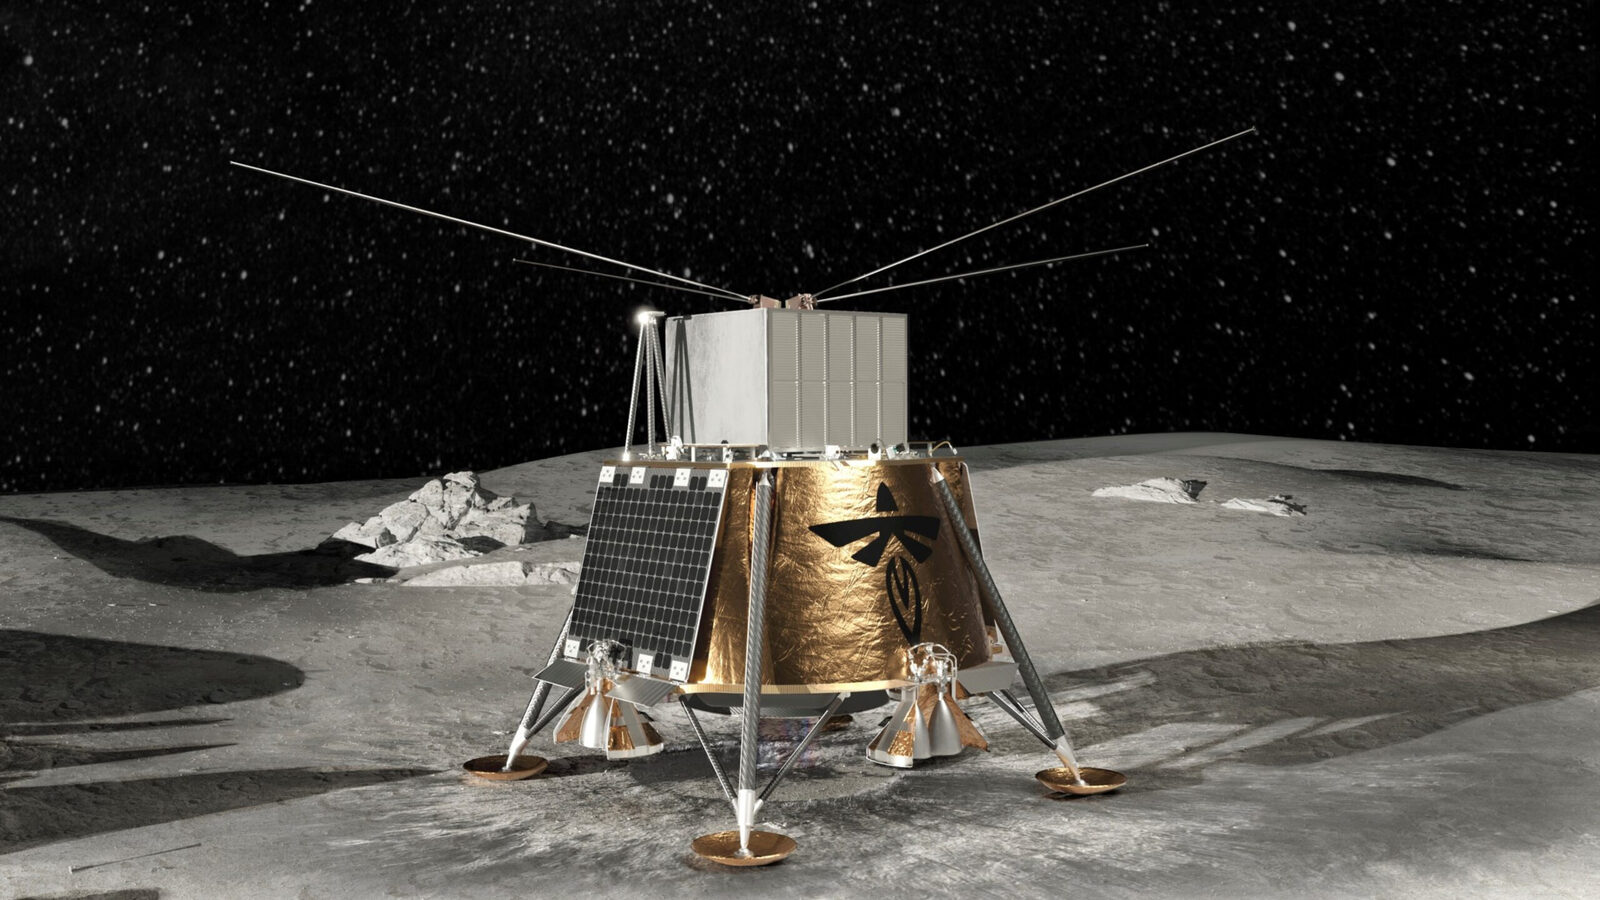 Lander on the surface of the moon